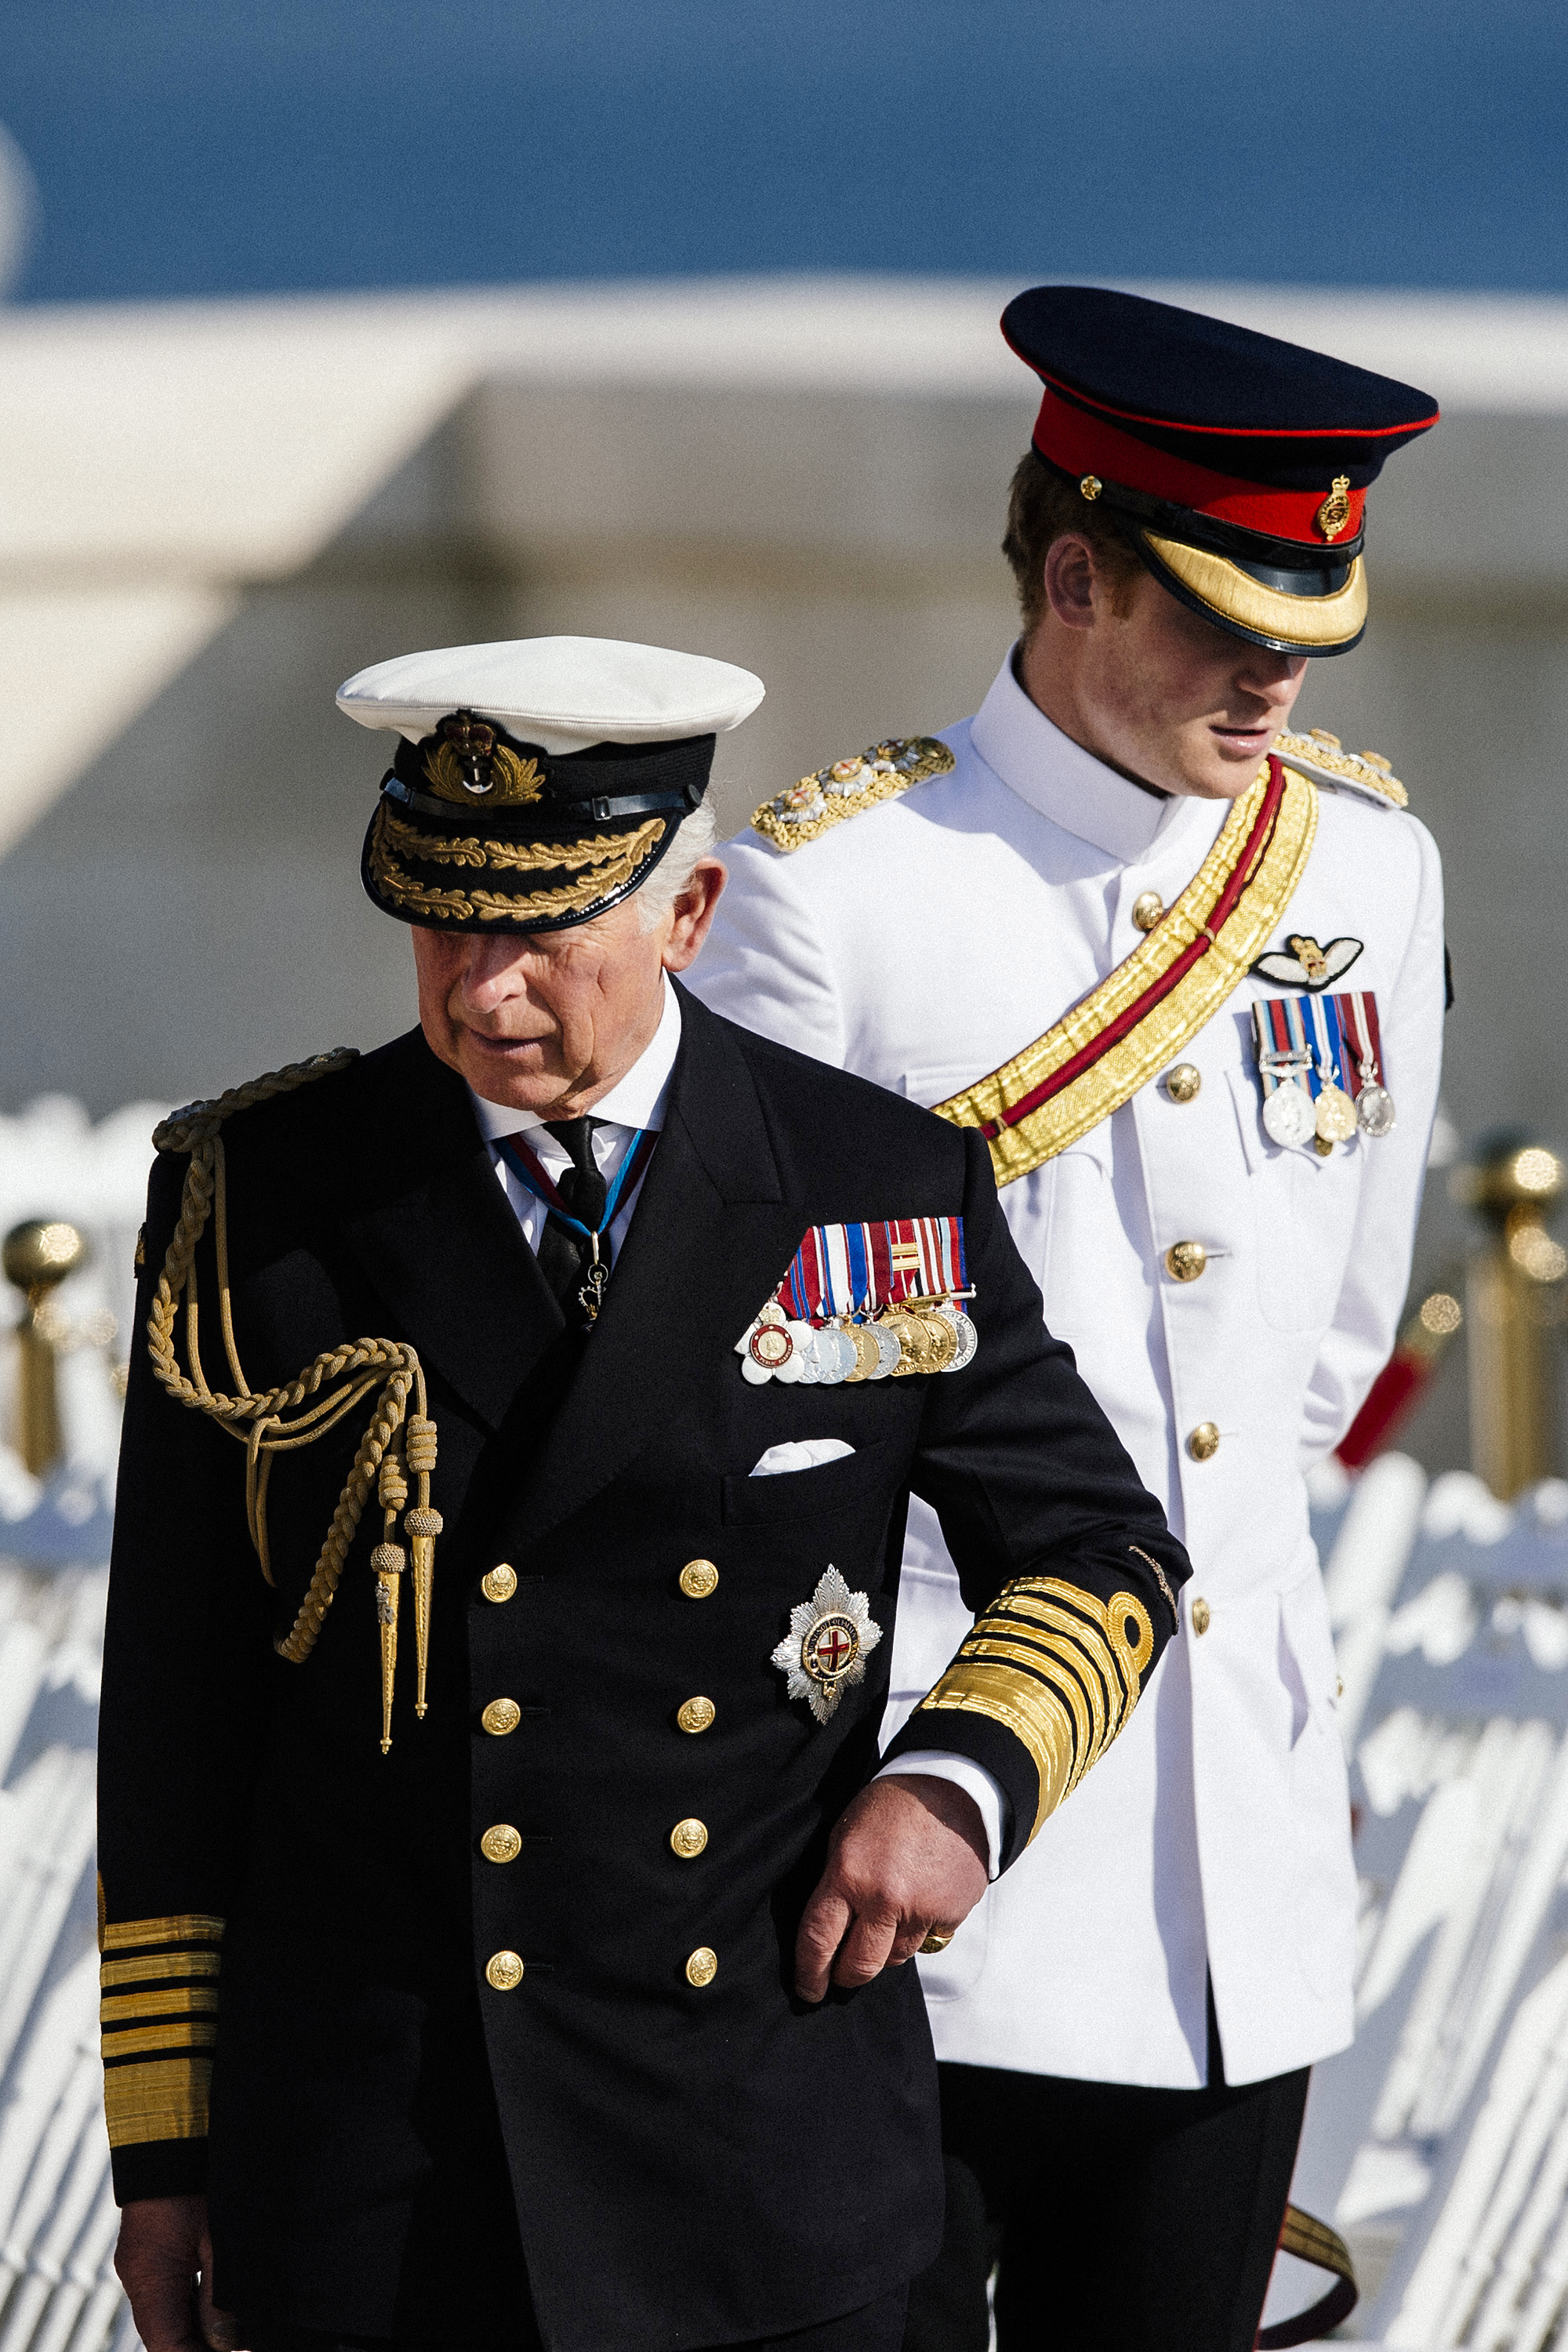 King Charles III and Prince Harry attending a memorial service marking the 100th anniversary of the start of the Battle of Gallipoli on the Gallipoli peninsula, Turkey on April 24, 2015 | Source: Getty Images